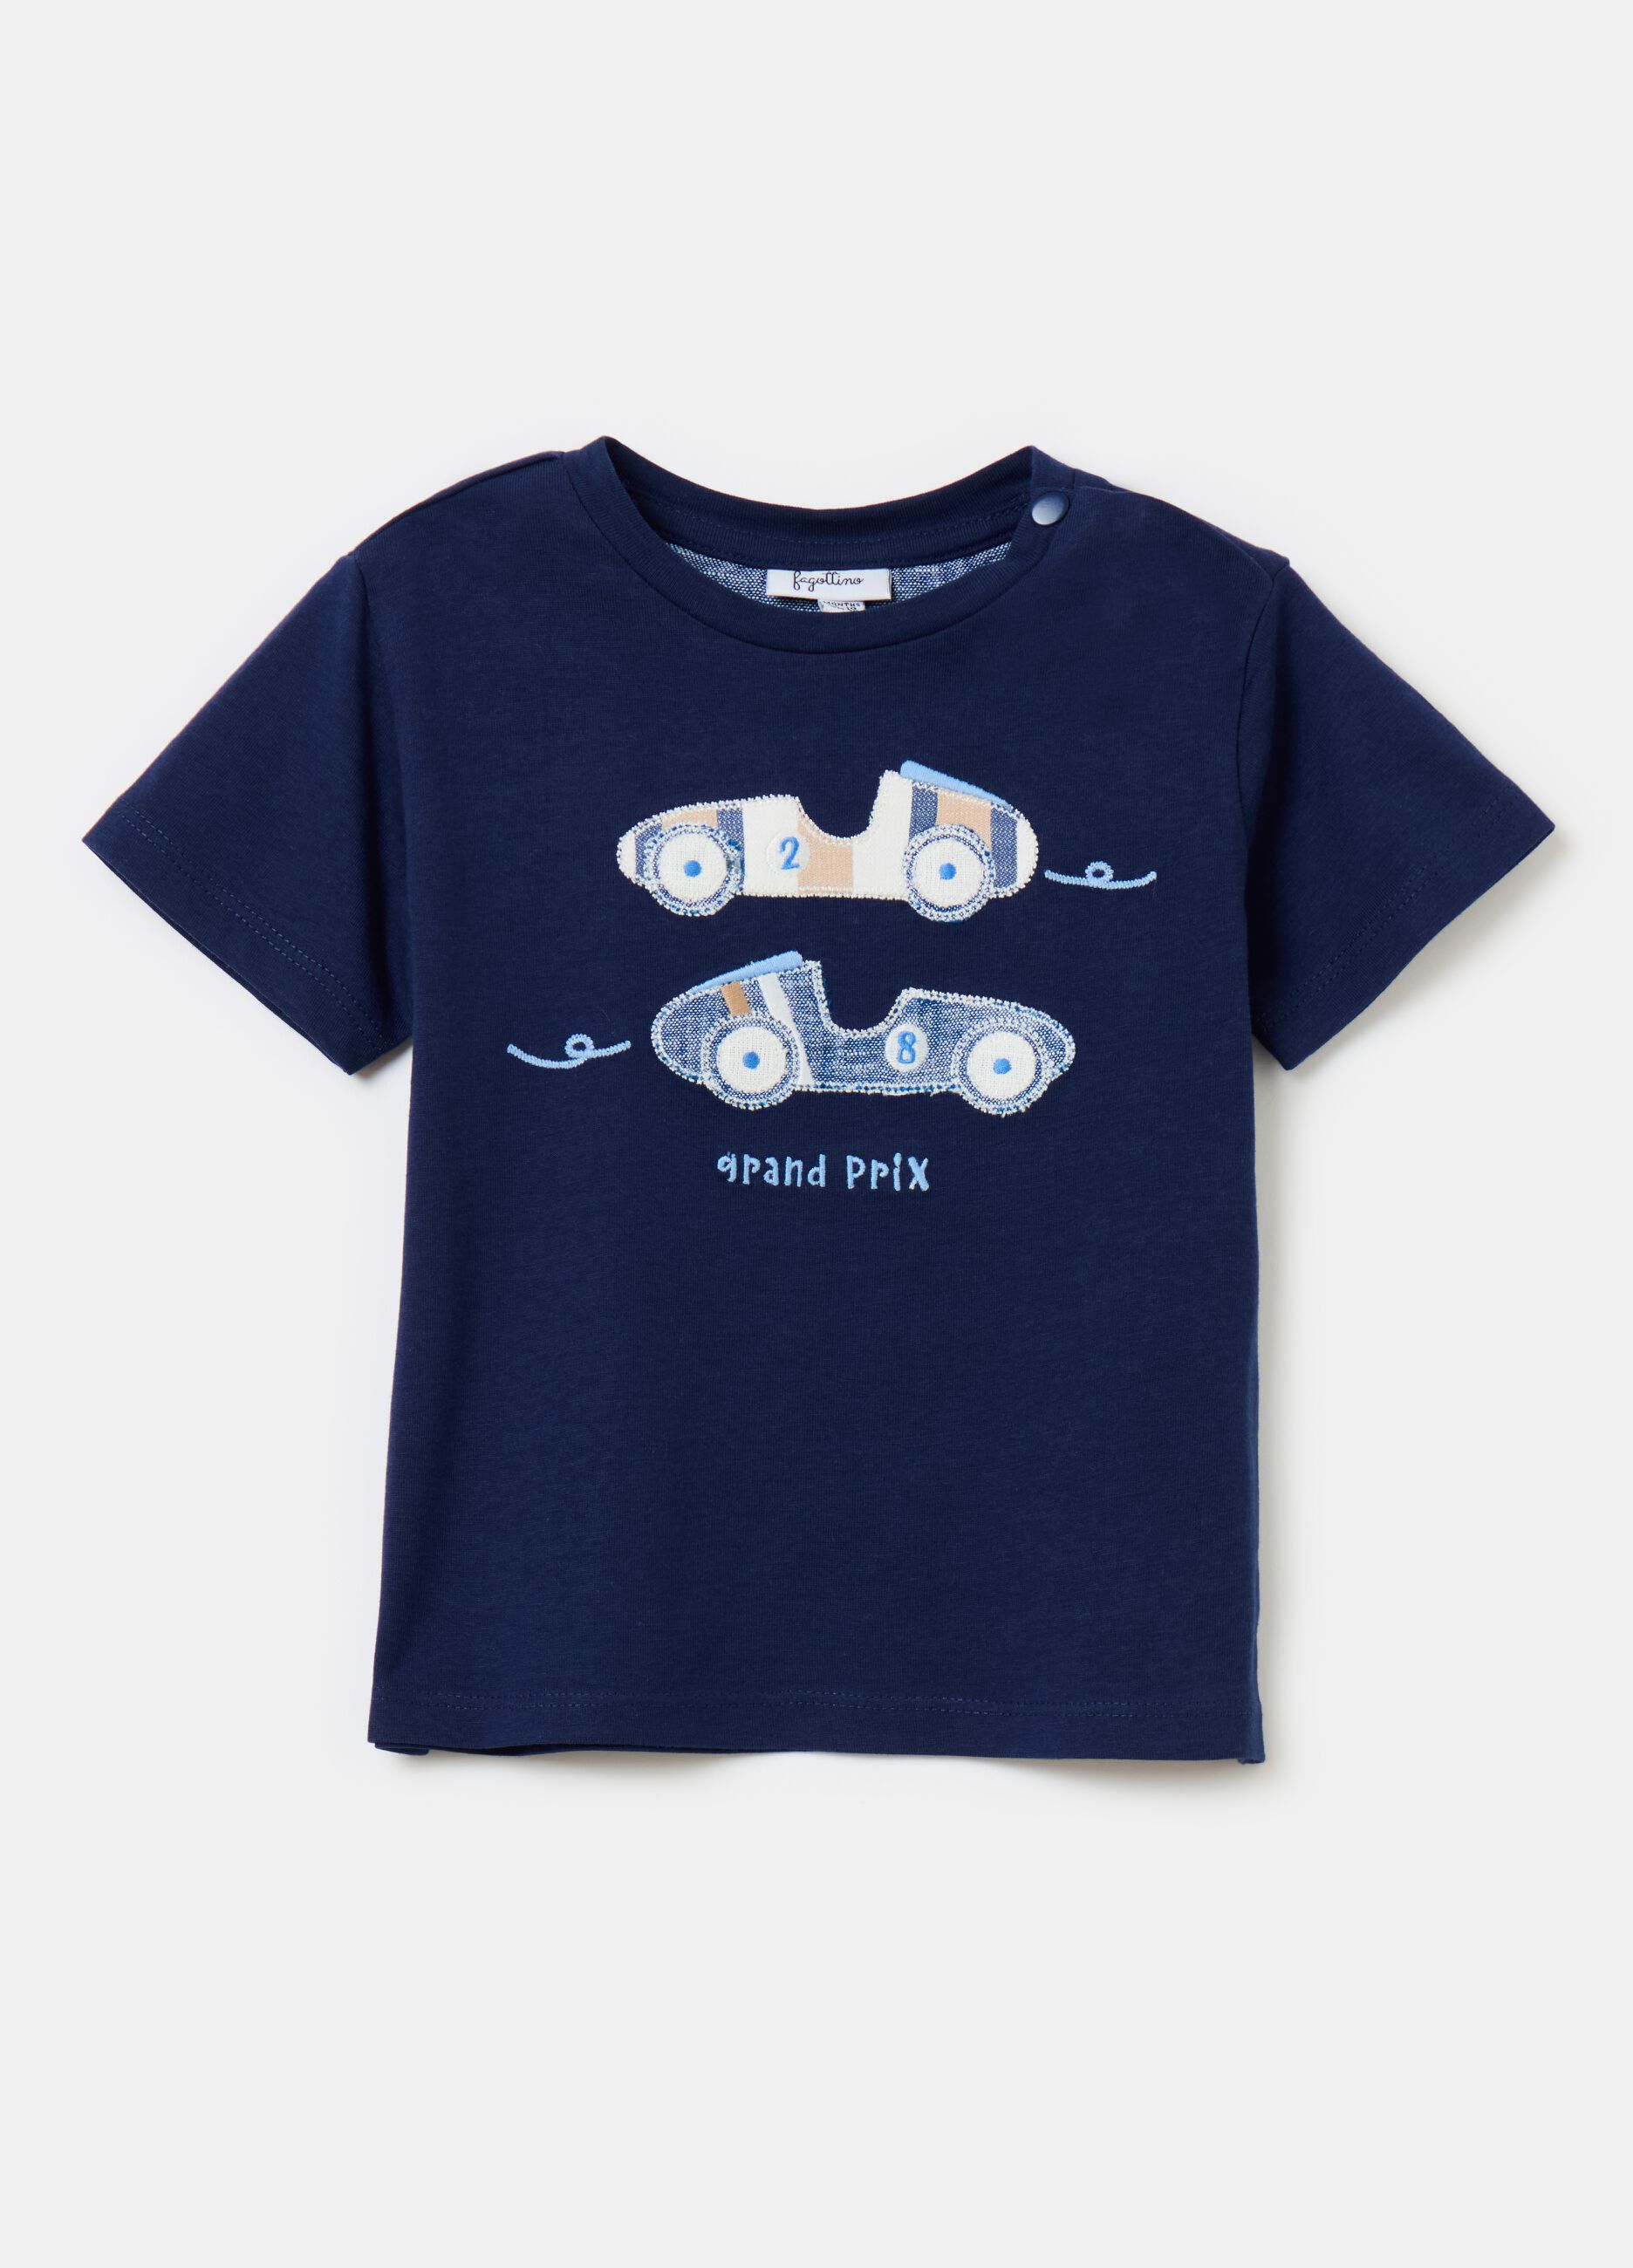 Cotton T-shirt with racing car patch